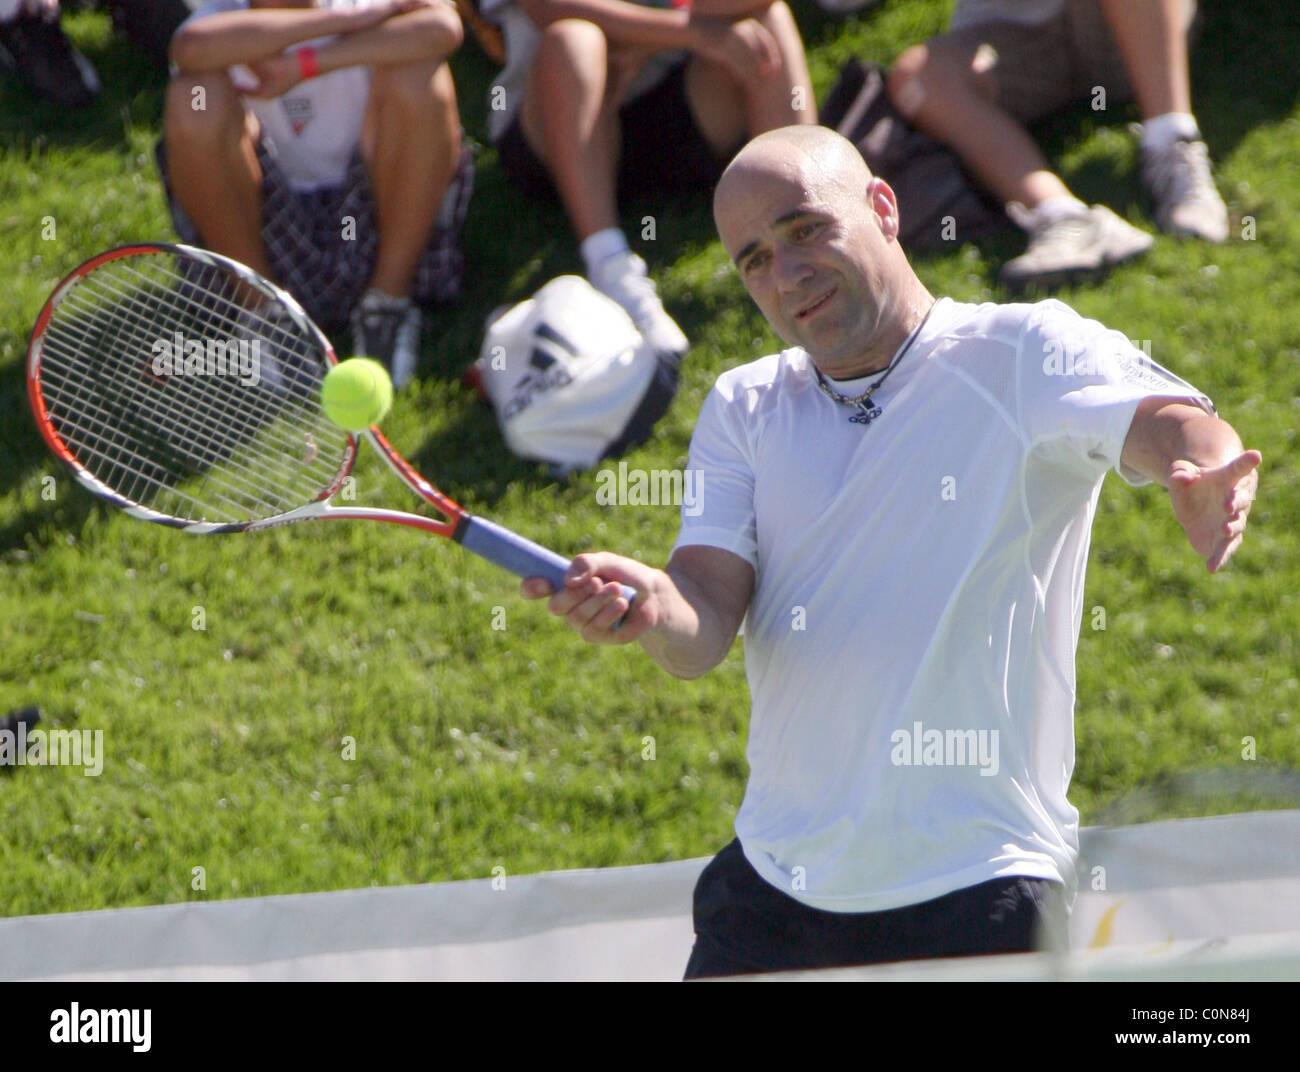 Andre Agassi at the Bryan Brothers' All-Star Tennis Smash, at the Sherwood  Country Club, Thousand Oaks, CA Stock Photo - Alamy